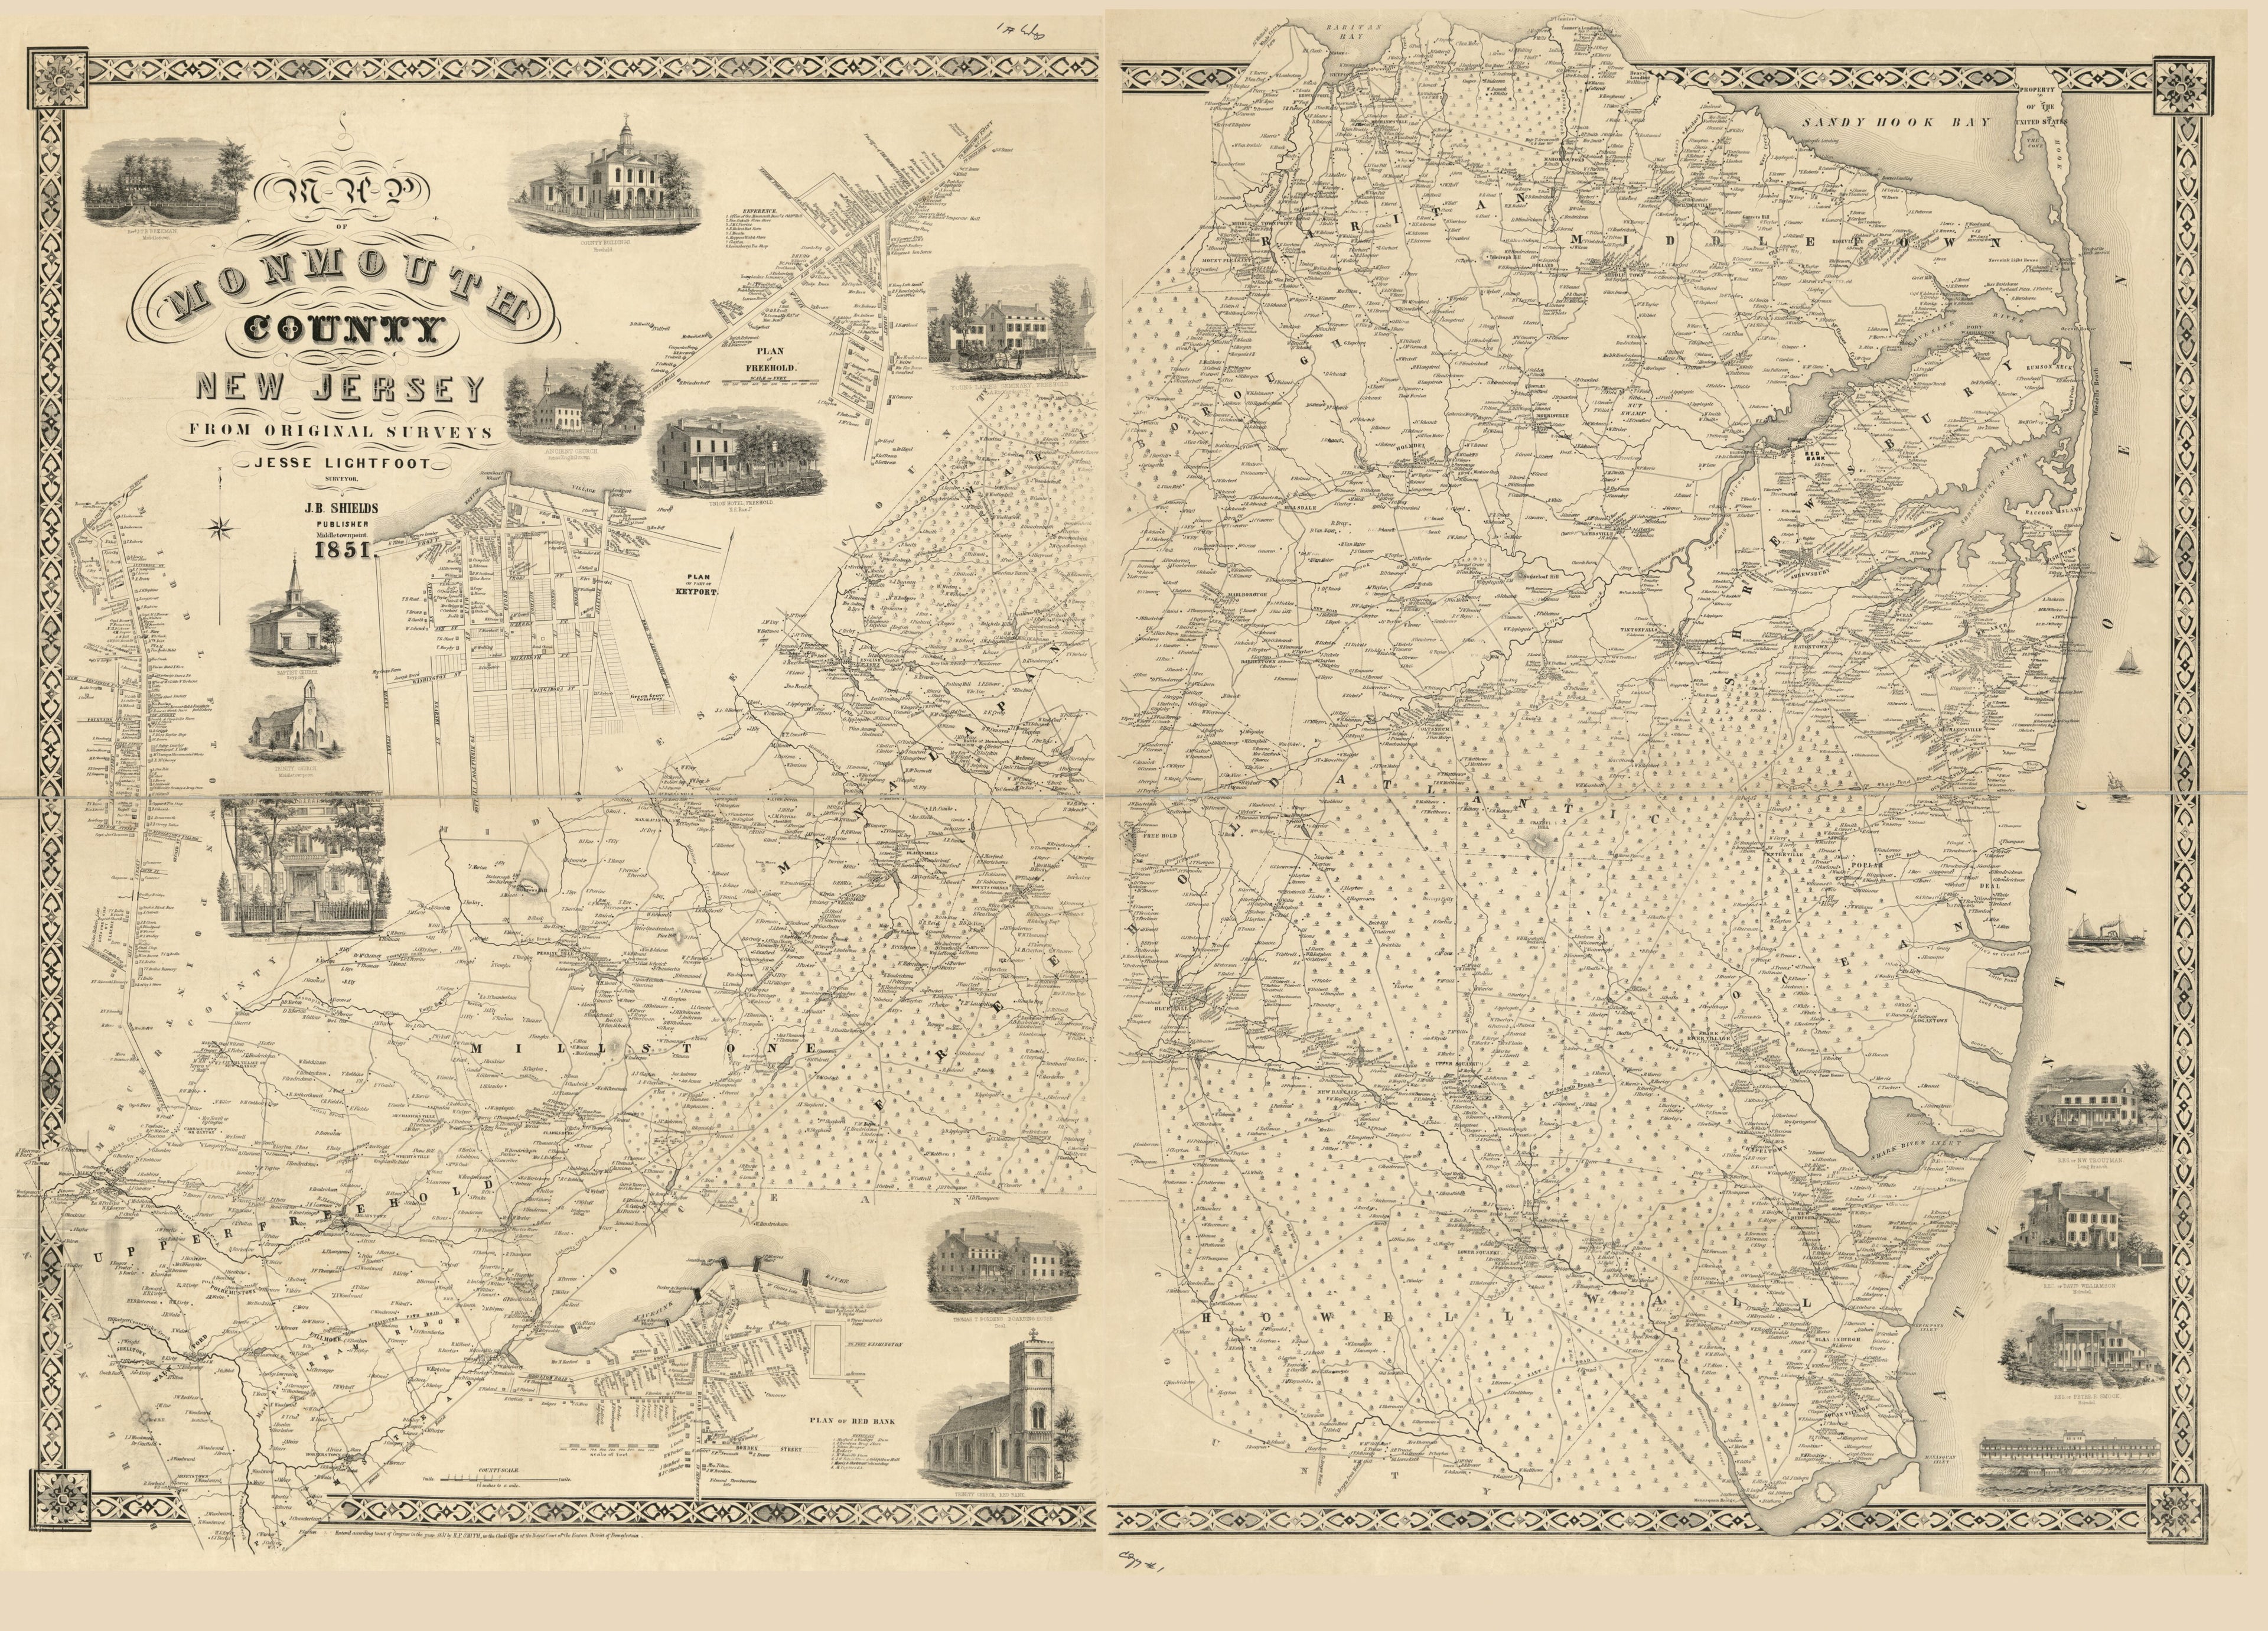 This old map of Map of Monmouth County, New Jersey : from Original Surveys from 1851 was created by Jesse Lightfoot, J. B. Shields, Robert Pearsall Smith in 1851